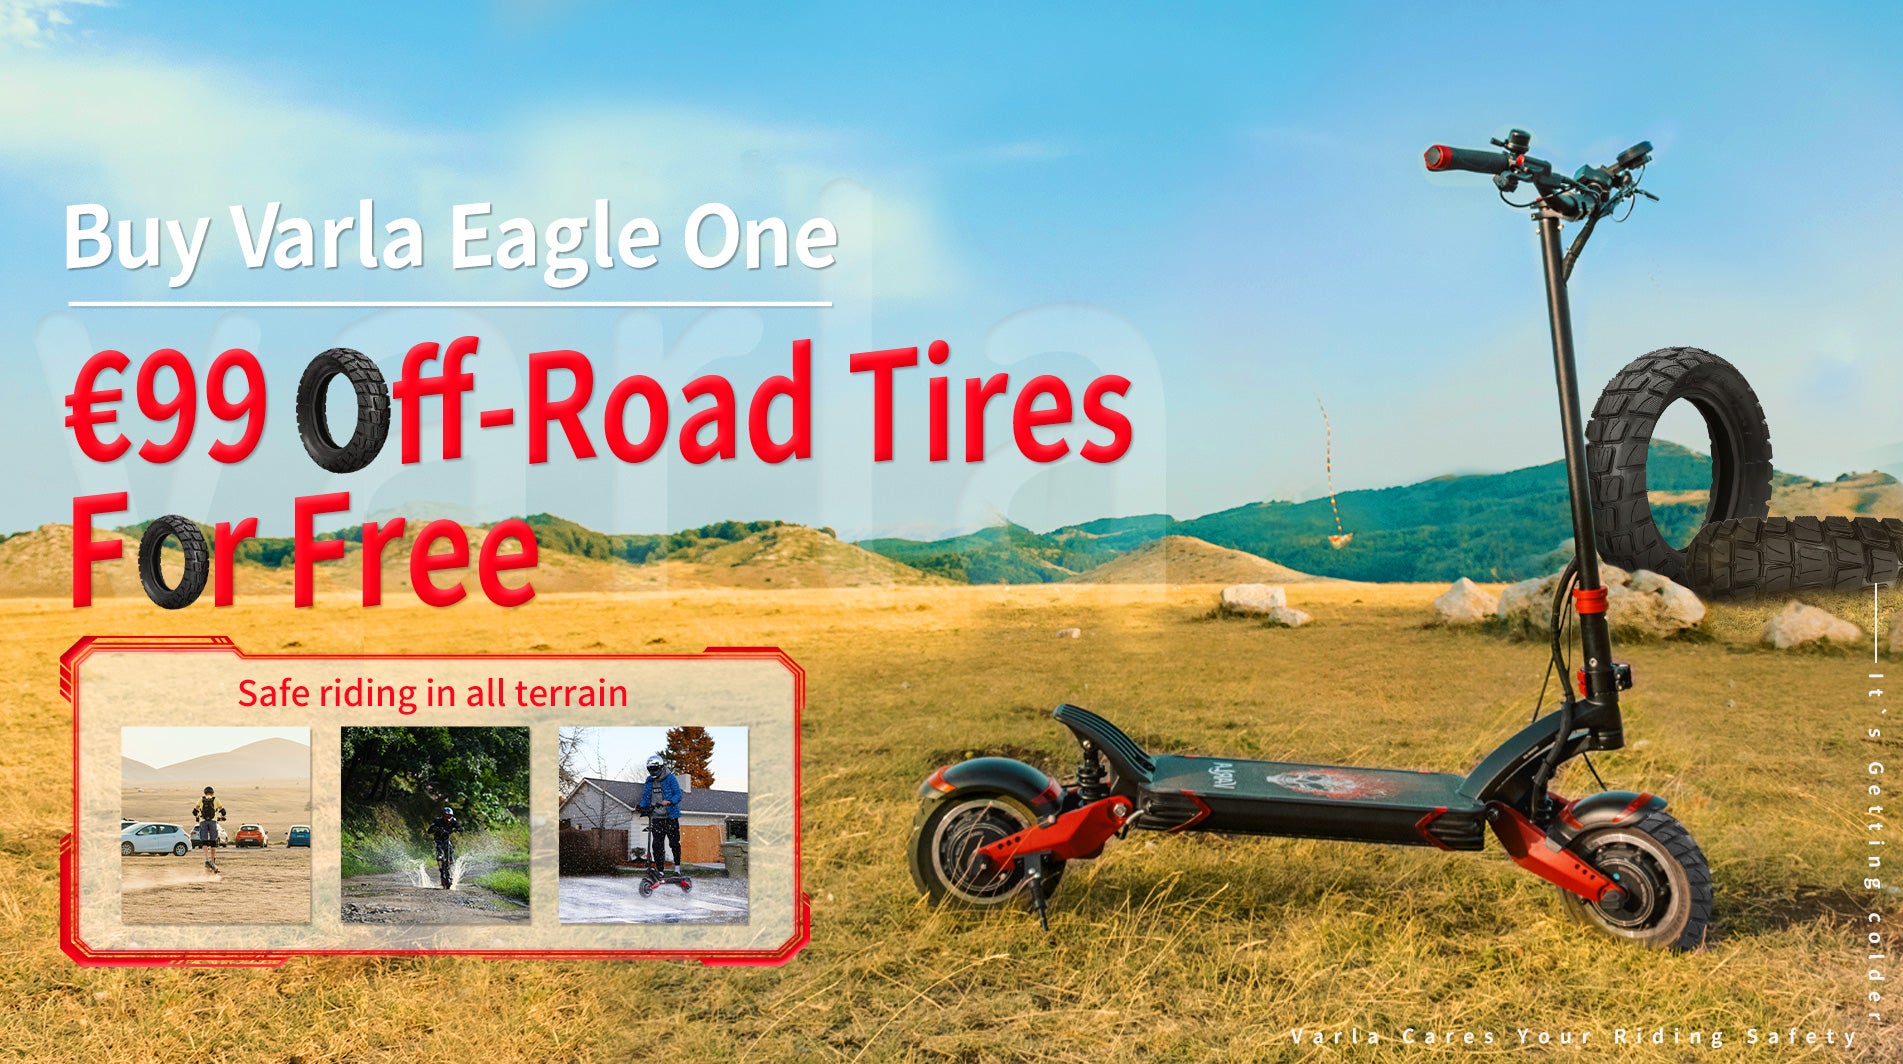 buy-varla-eagle-one-and-get-off-road-tires